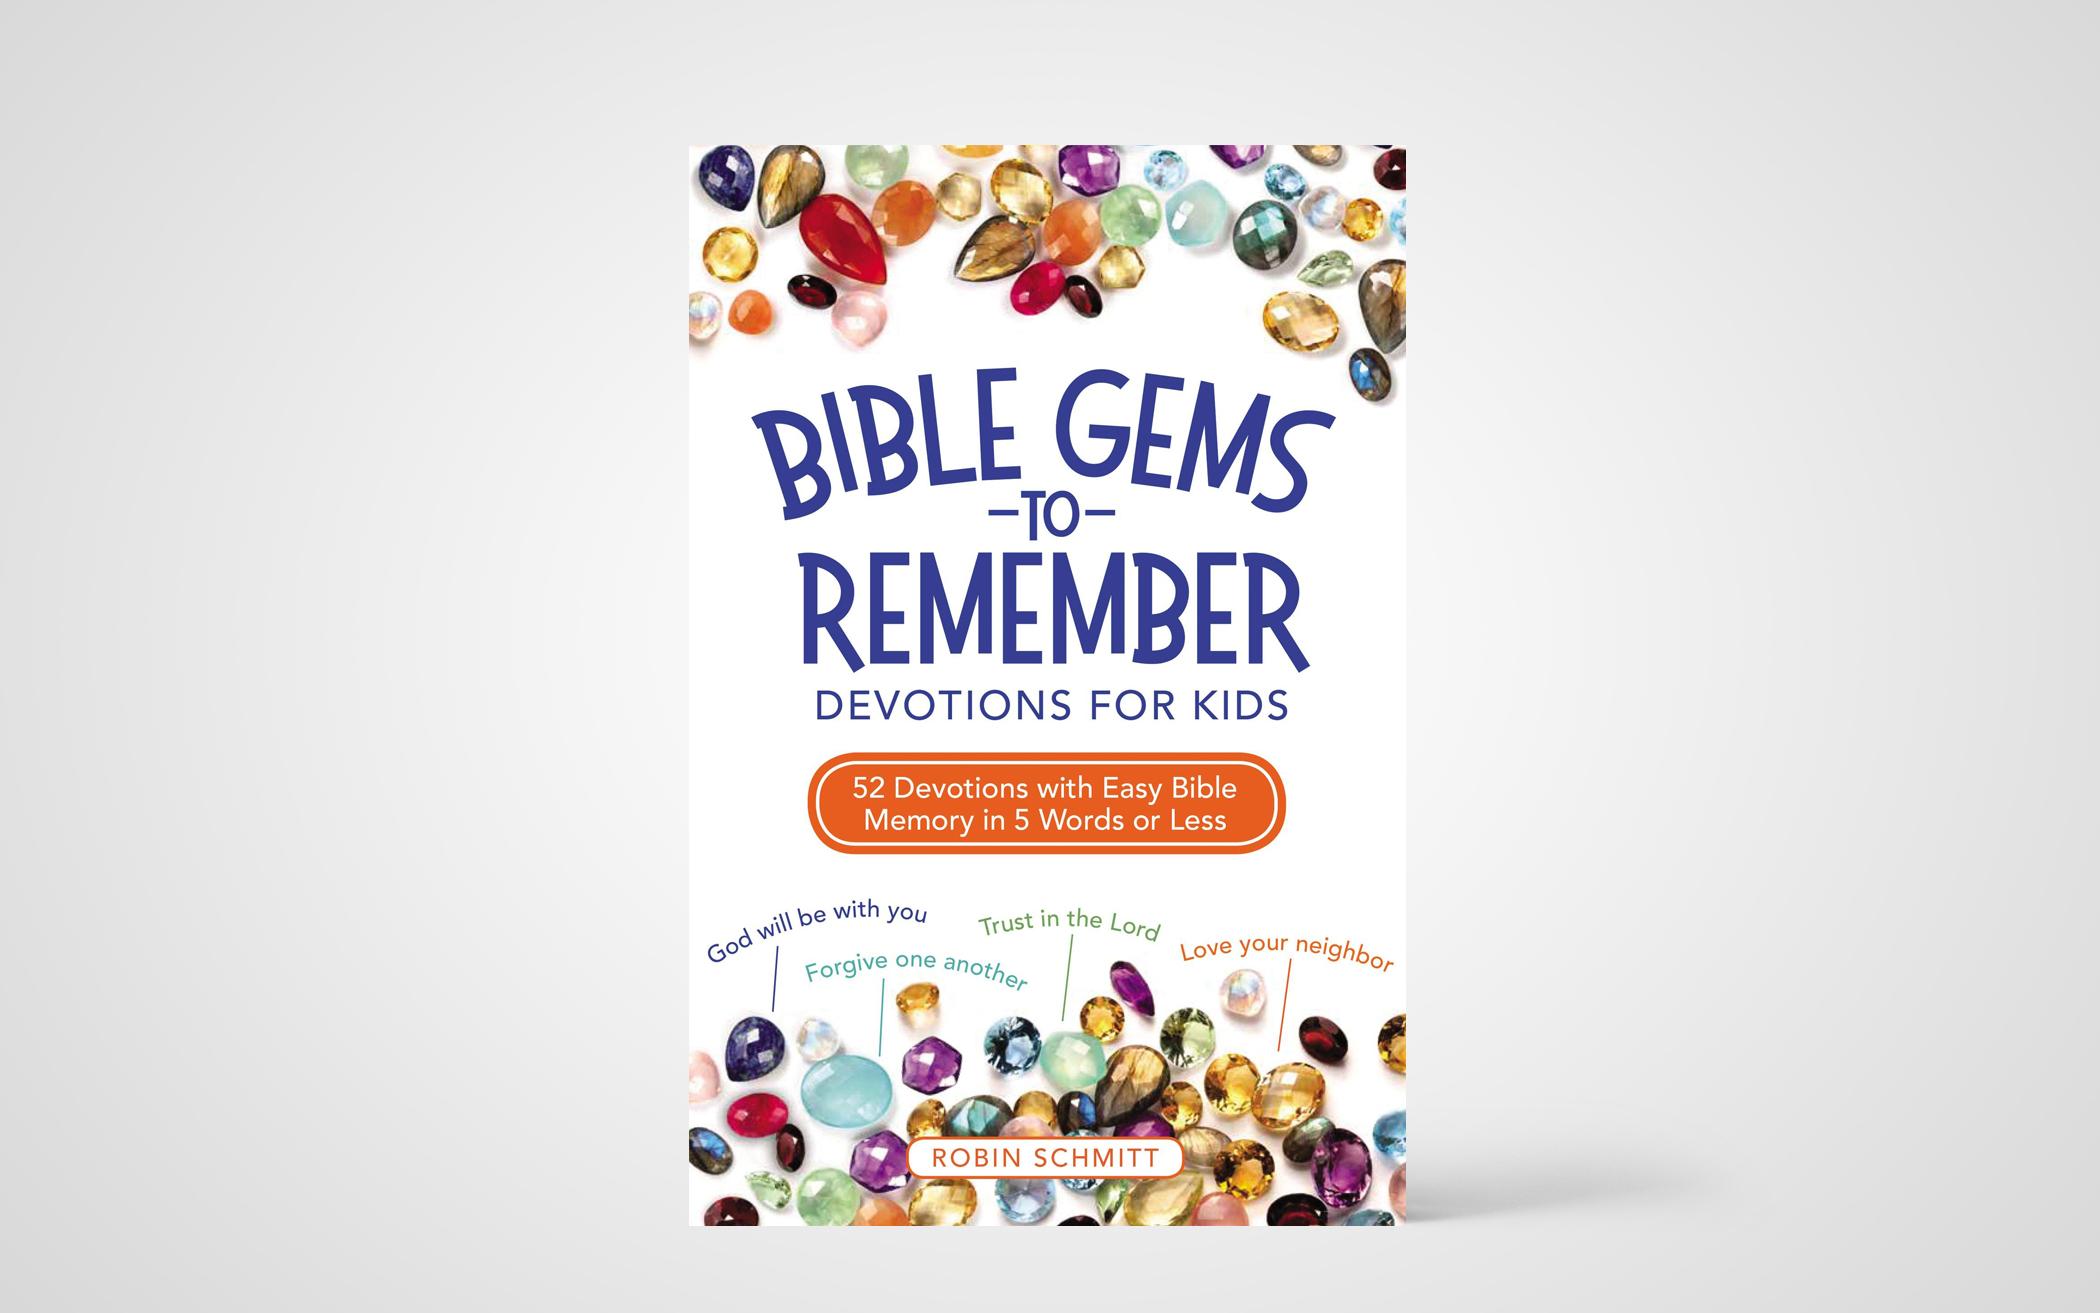 Bible Gems to Remember Devotions for Kids: 52 Devotions with Easy Bible Memory in 5 Words or Less 